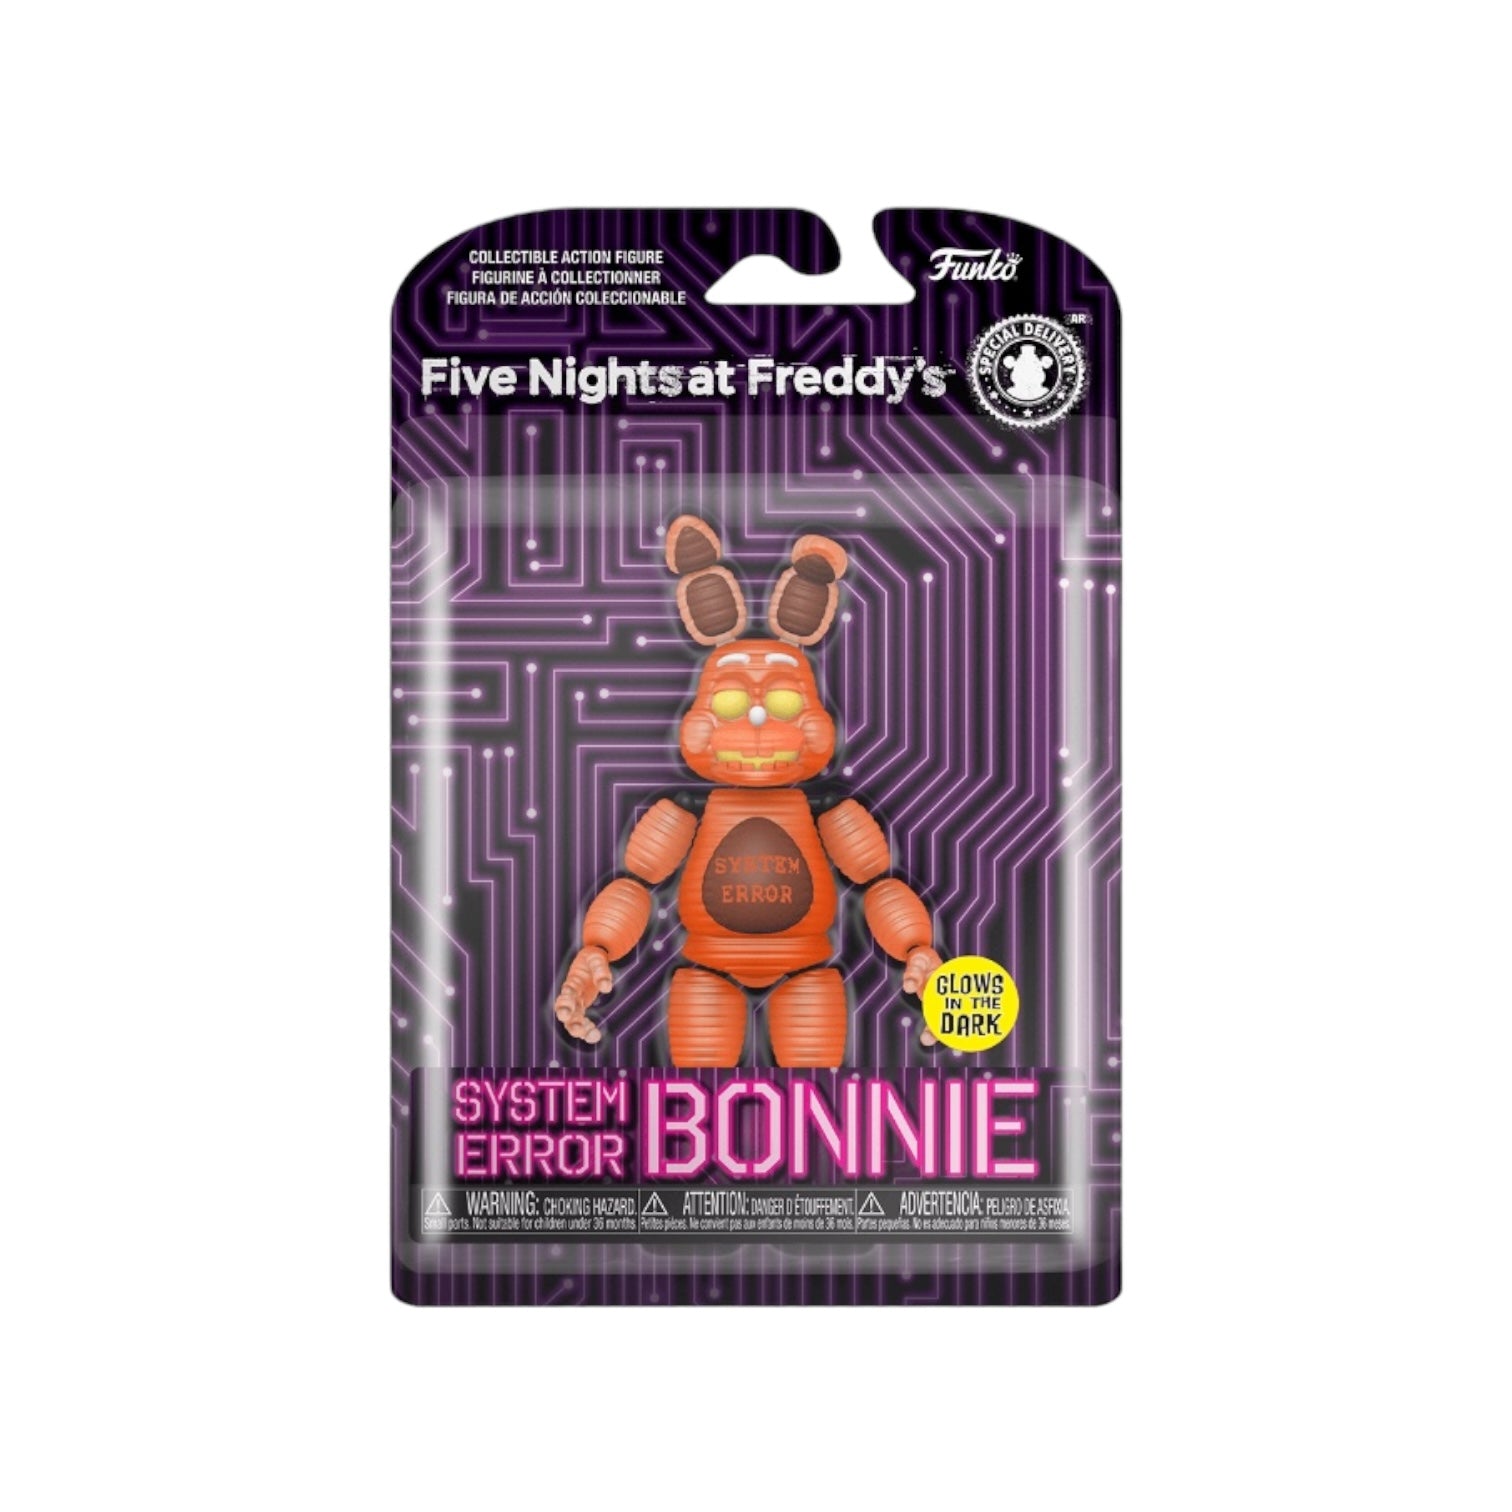 System Error Bonnie (glows in the dark)- Funko Action Figure - Five Nights at Freddy's